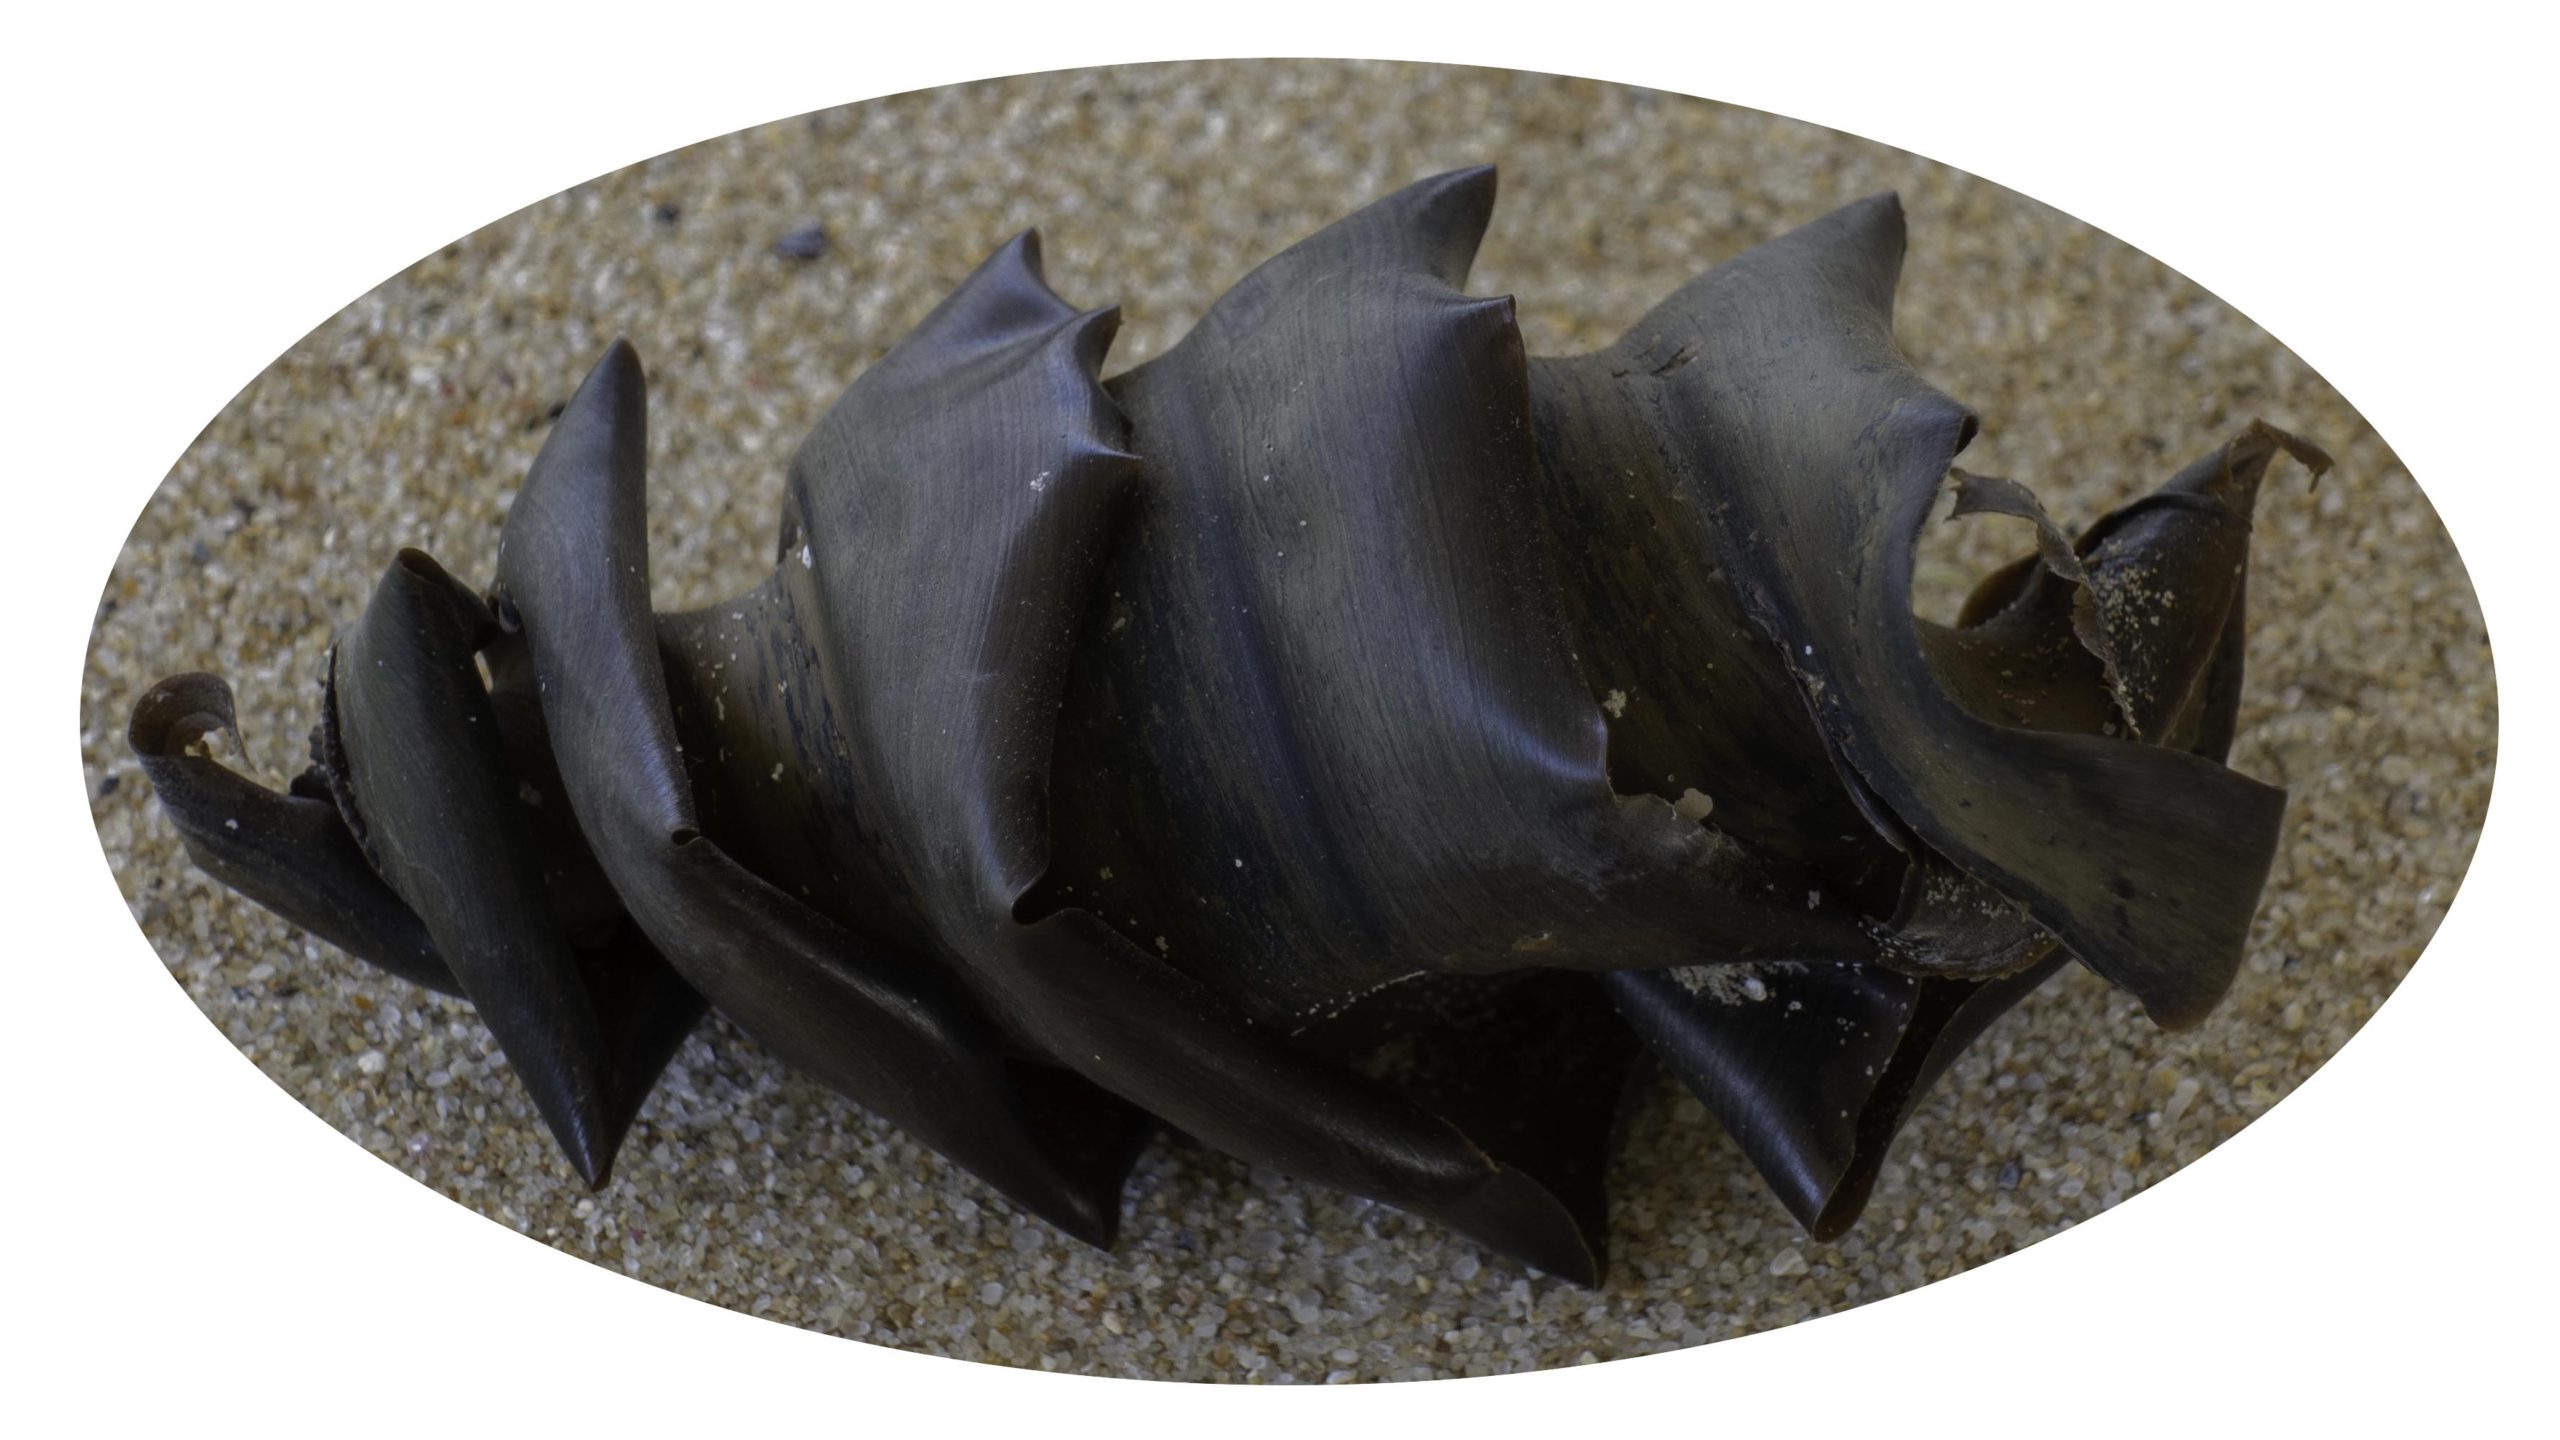 Weekly Creature Feature: Do you know what this is?